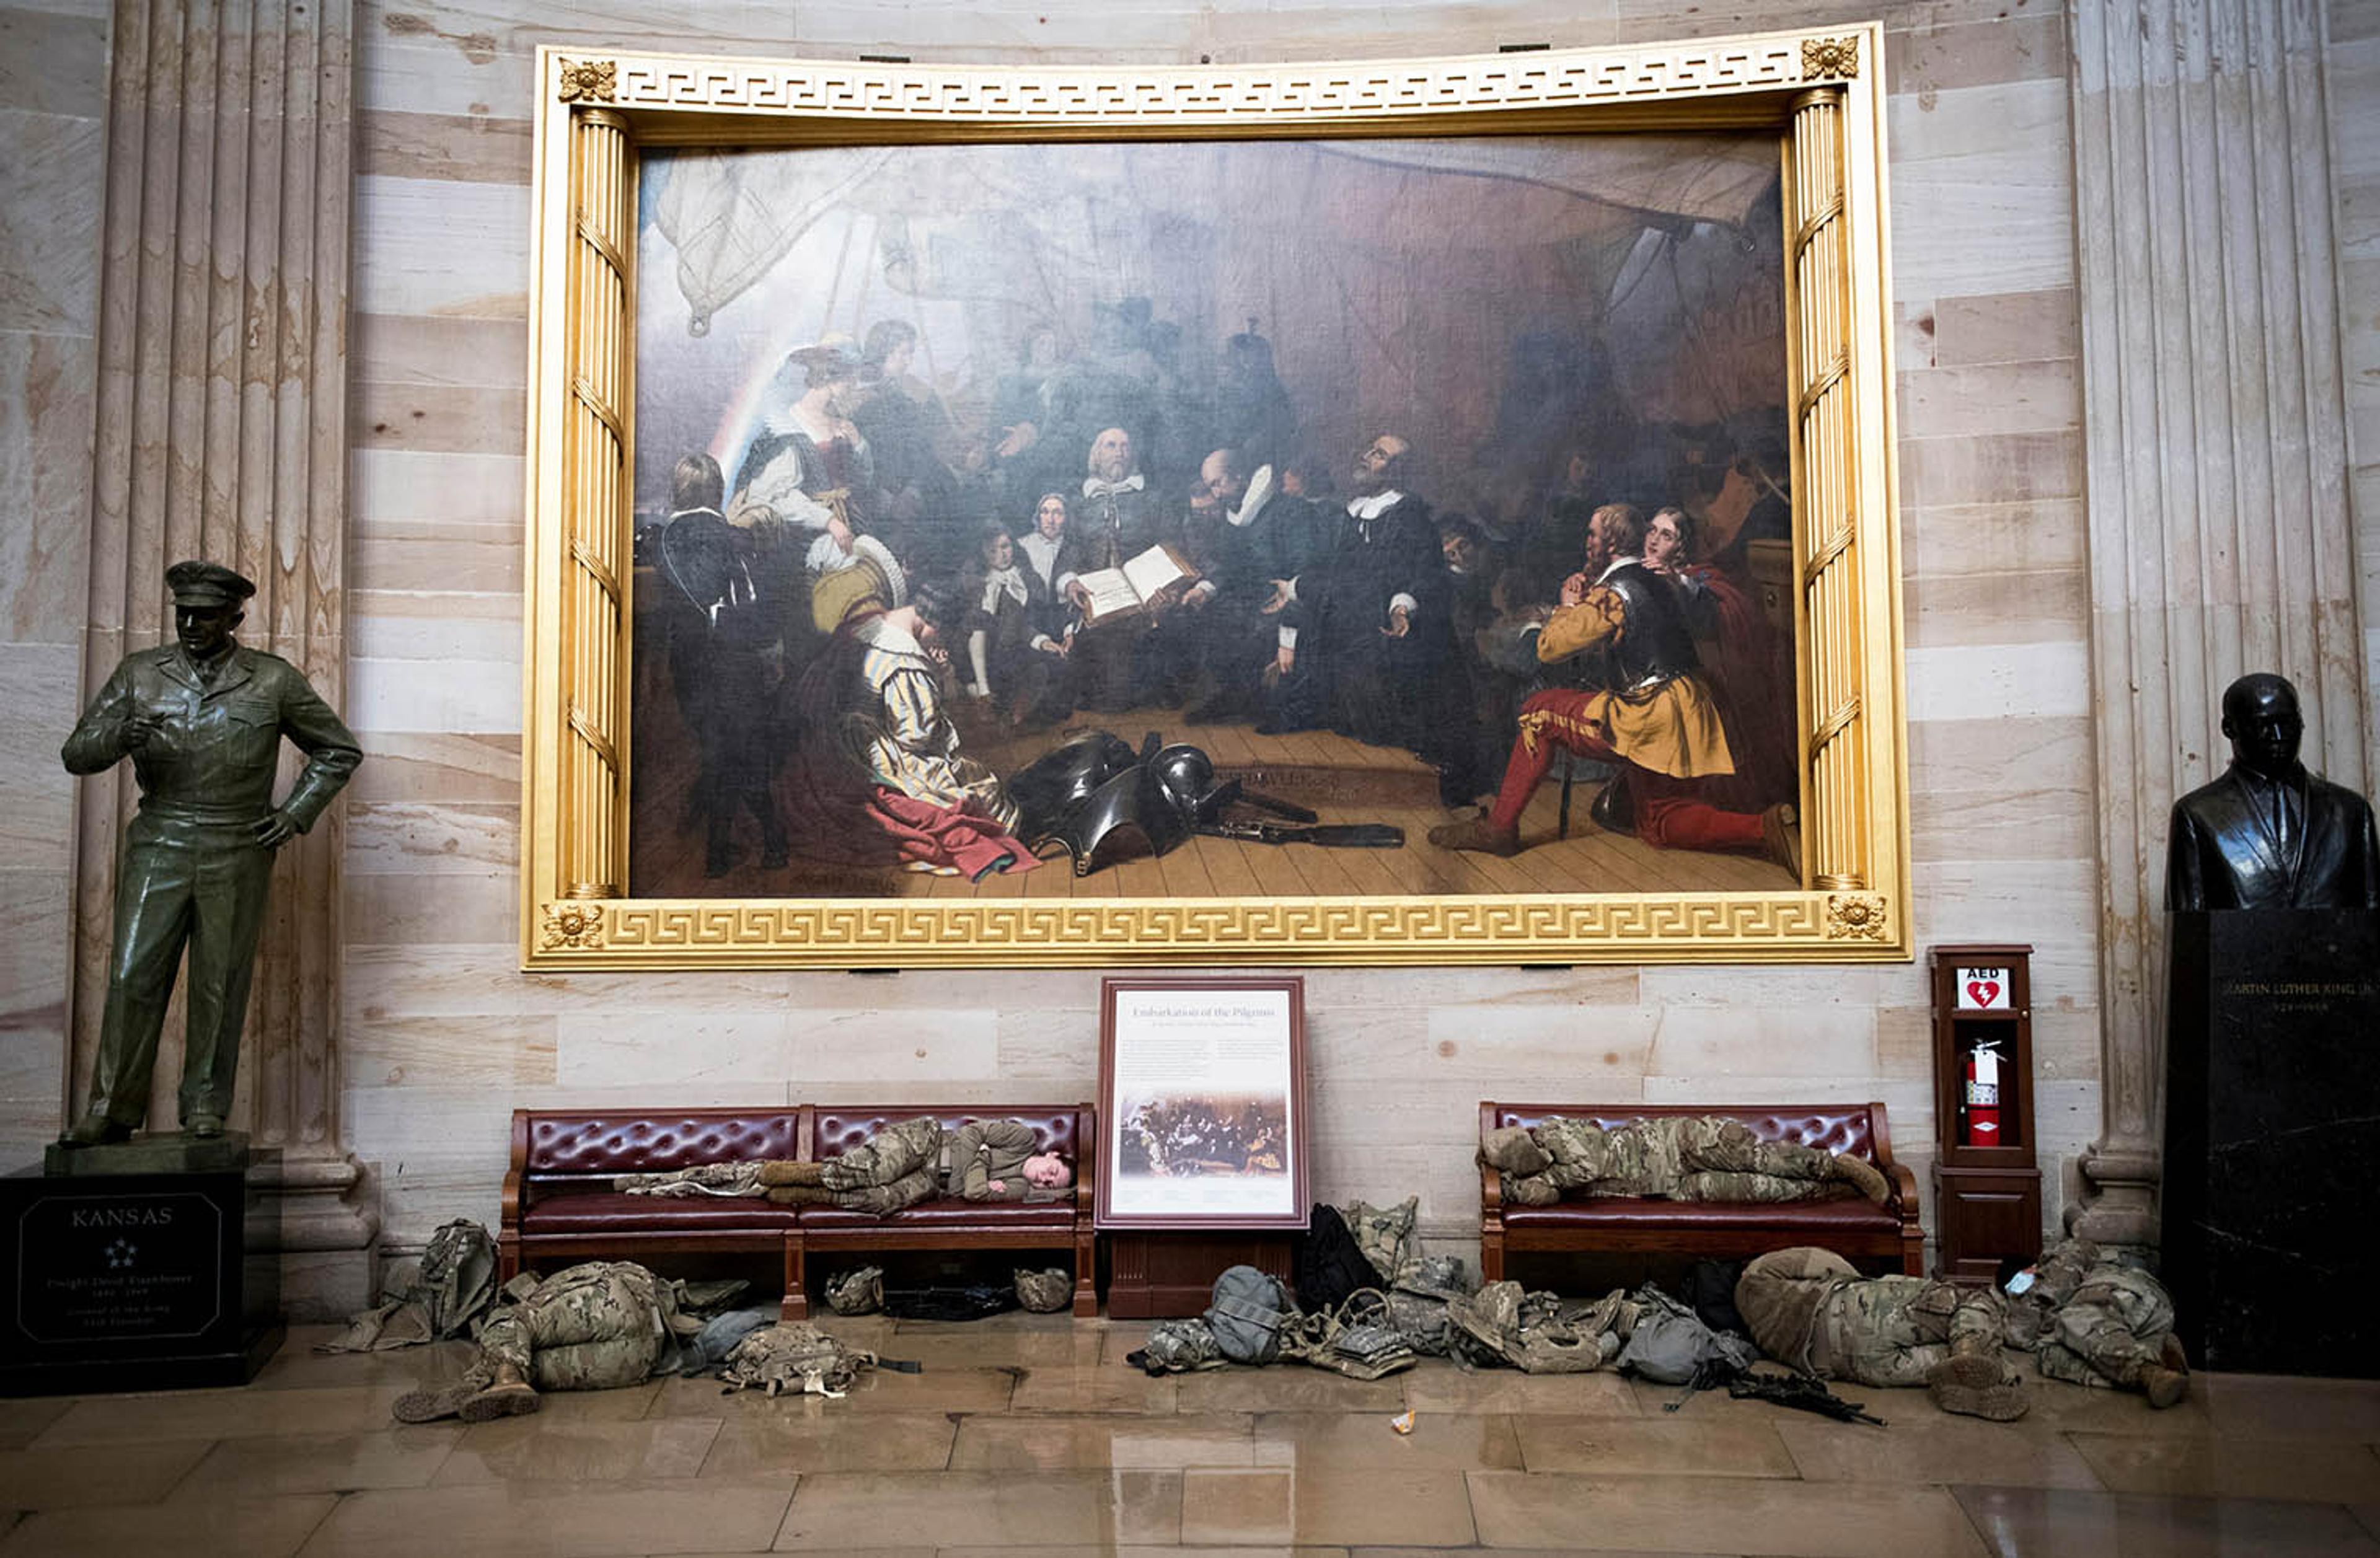 Soldiers sleeping in front of a large painting at the Capitol.